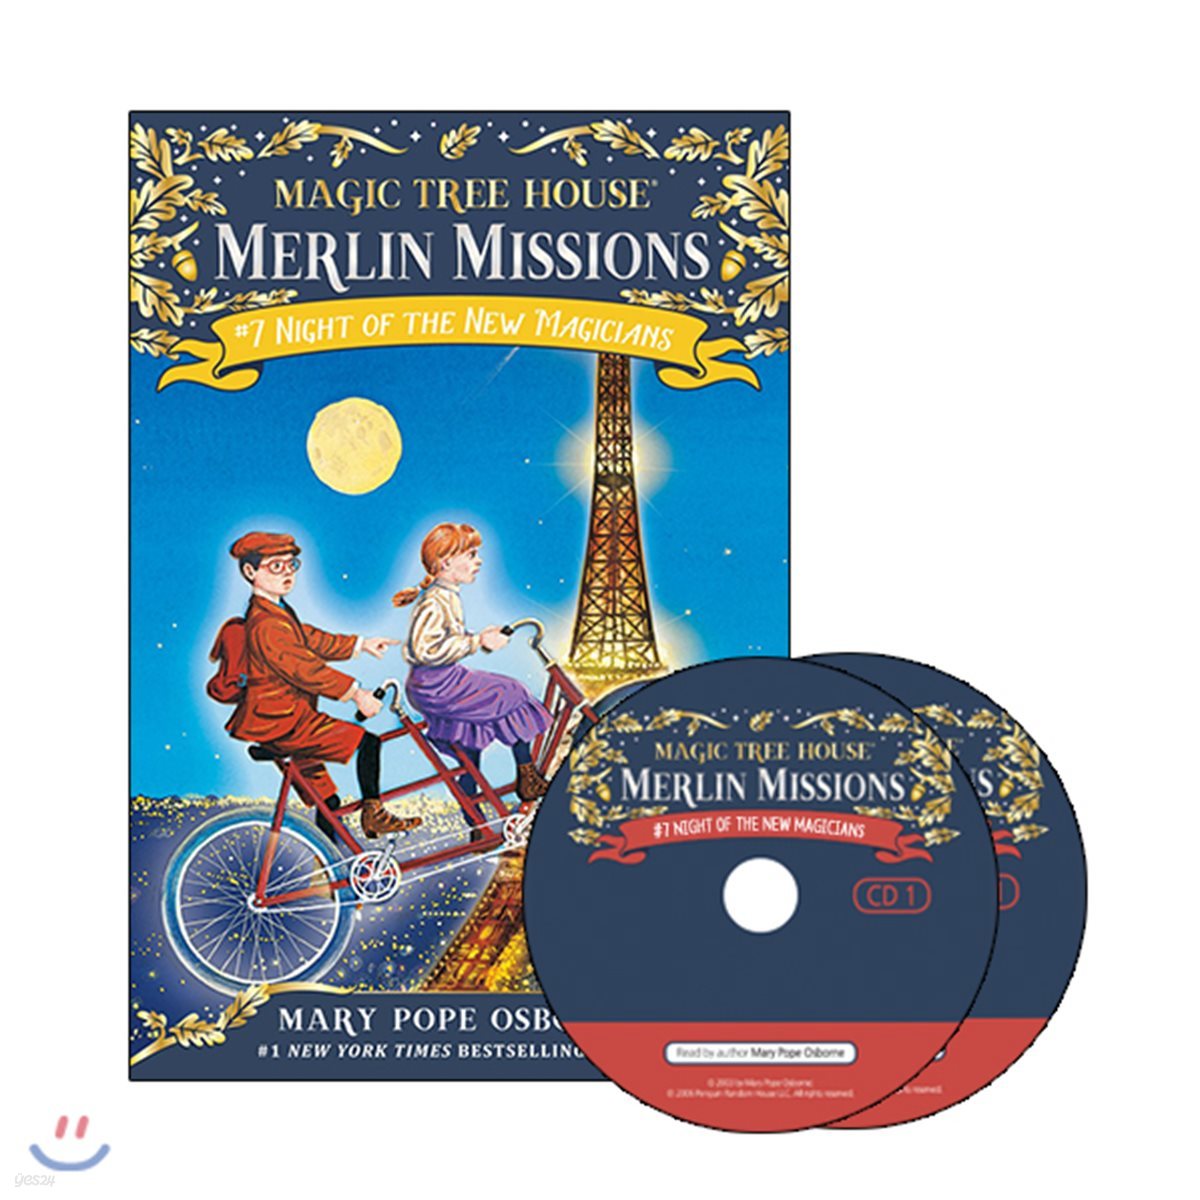 Merlin Mission #7 : Night of the New Magicians (Book + CD)